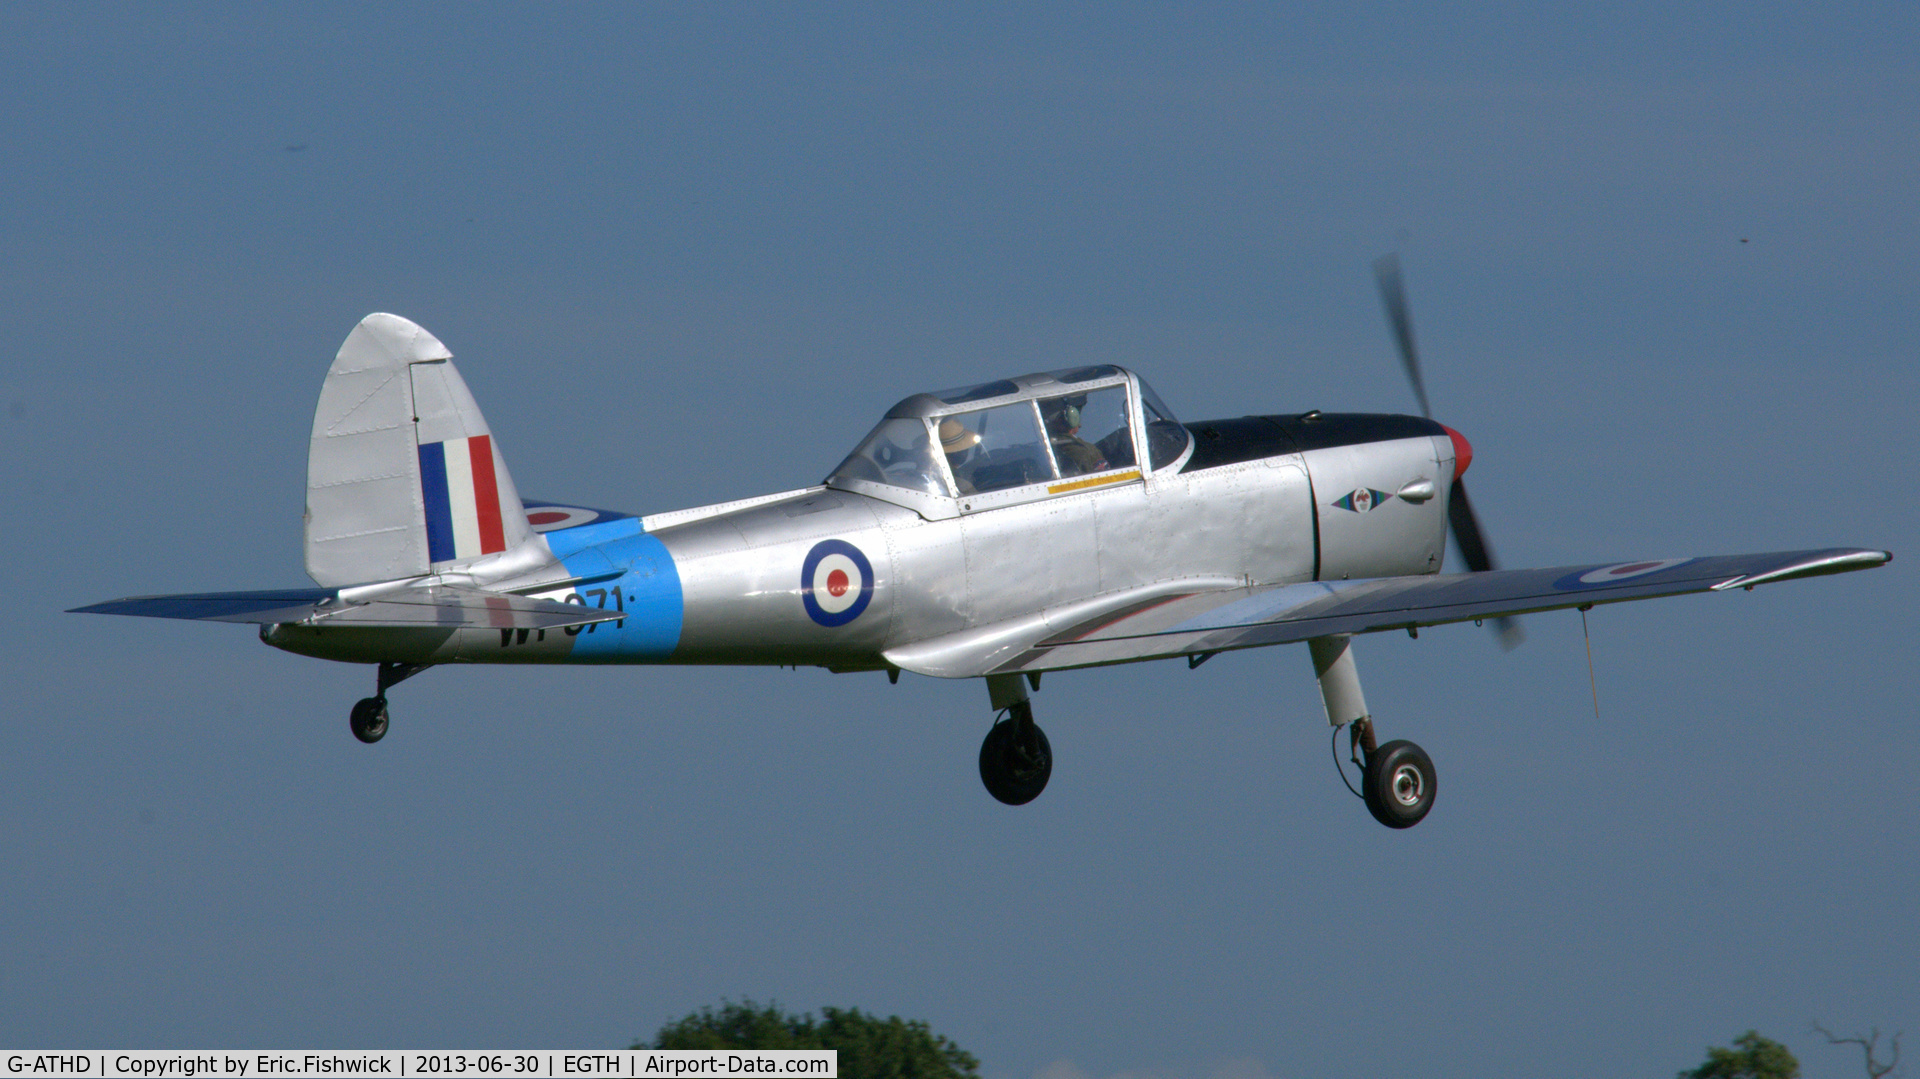 G-ATHD, 1953 De Havilland DHC-1 Chipmunk T.10 C/N C1/0837, 42. G-ATHD departing the Shuttleworth Military Pagent Flying Day, 30 June 2013.